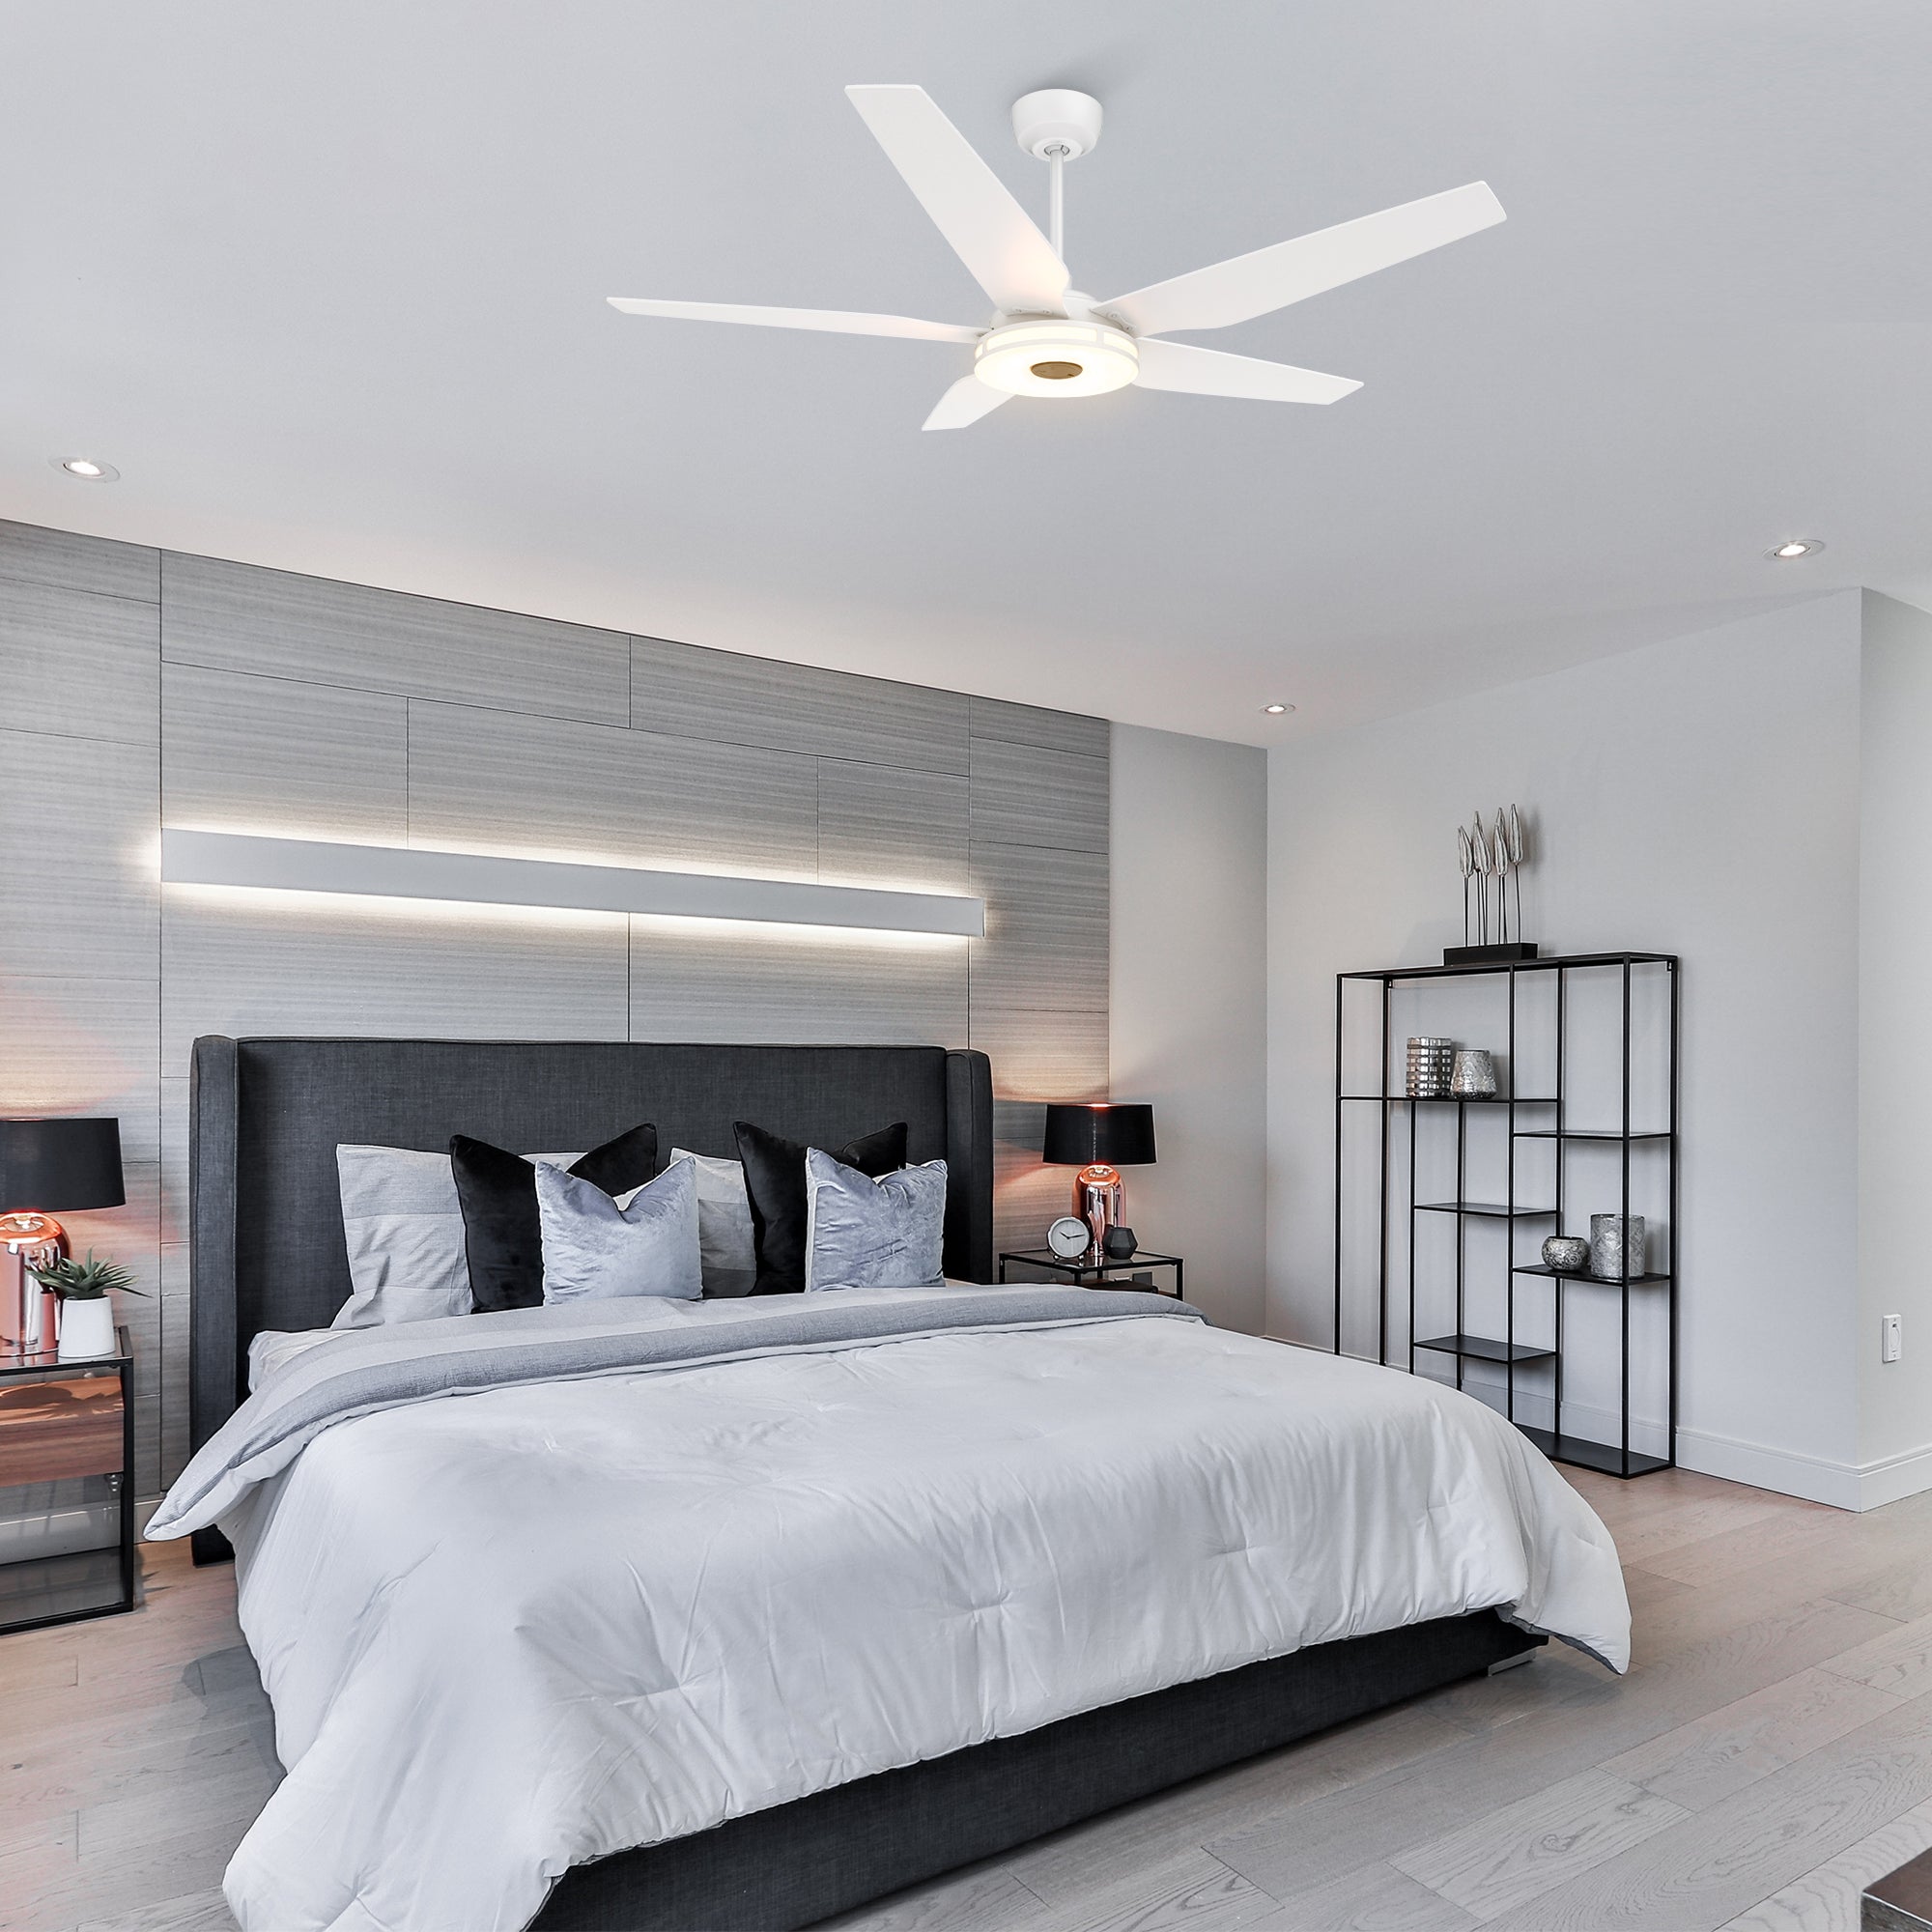 The Smafan Explorer 52&#39;&#39; smart WIFI ceiling fan brings a modern touch to your home décor. Making life simpler is what exactly Explorer does for you. With dimmable integrated LED, 10-speed whisper-quiet DC motor, Alexa, Google Assistant, Siri enabled. Easy install.